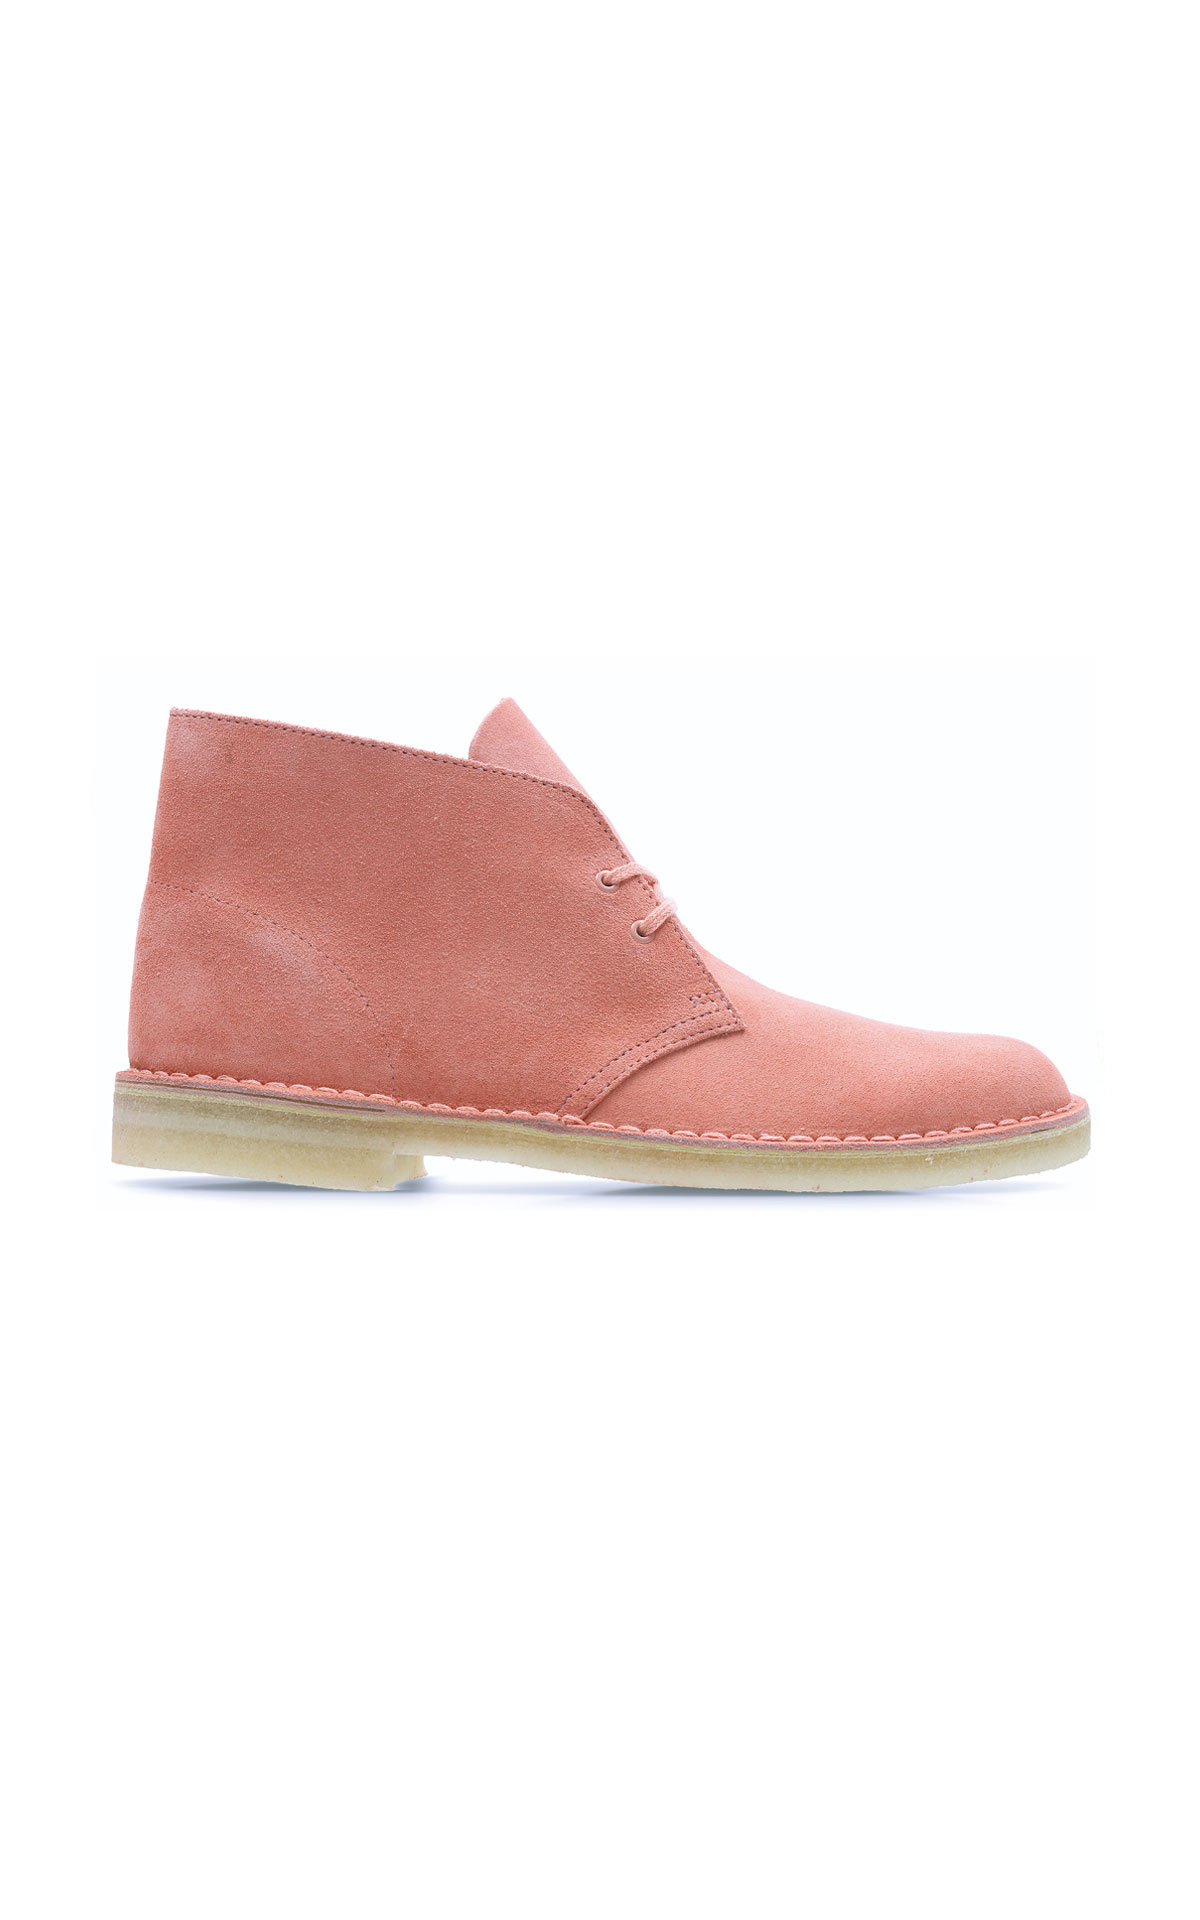 Clarks  Desert boot coral from Bicester Village